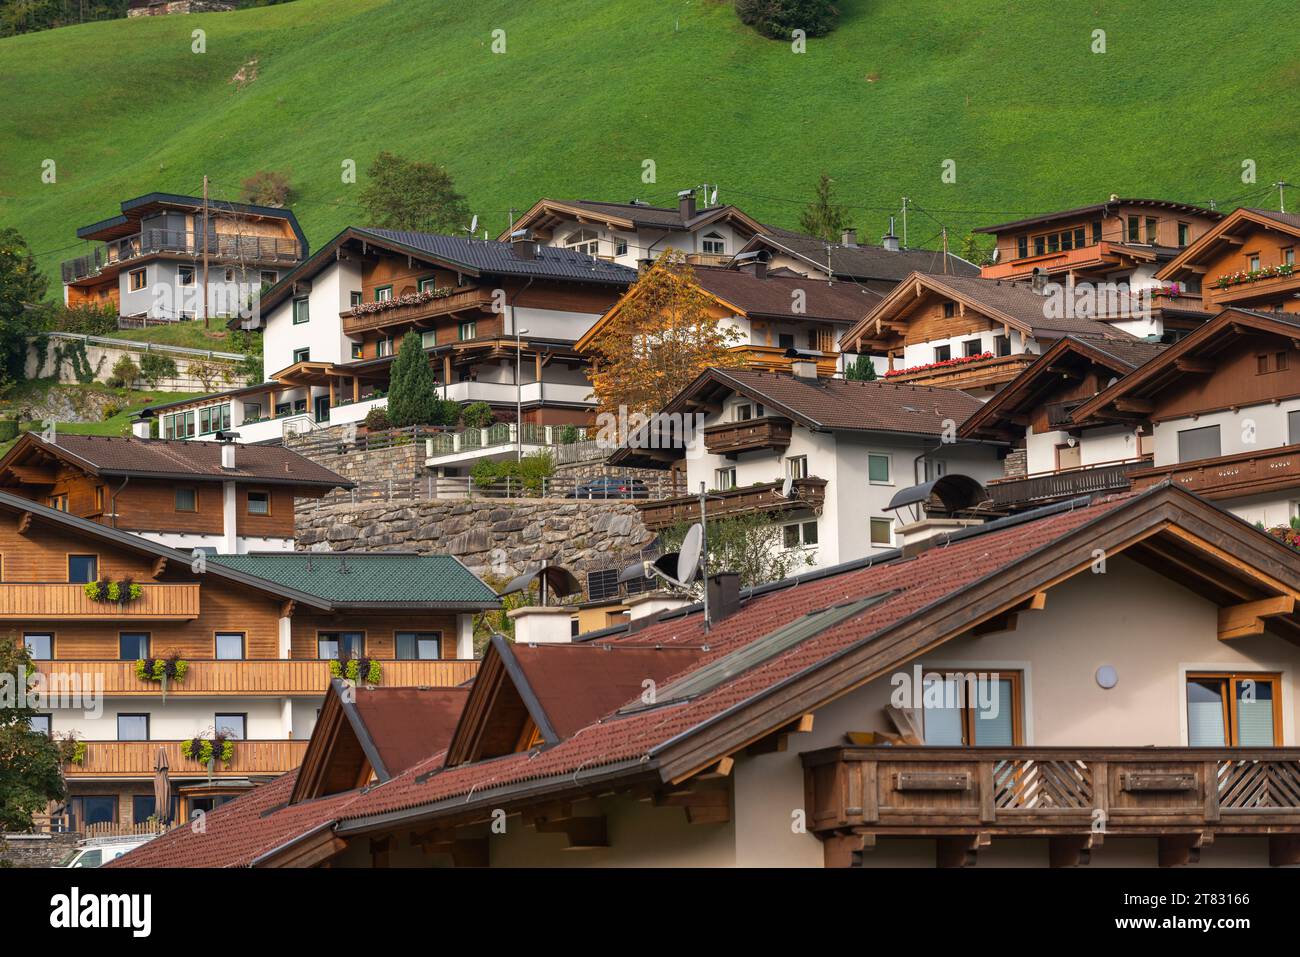 Typical Tyrolean houses with wooden gable and balcony in Finkenberg community, Valley Tuxertal, The Apls, Zillertaler Alpen, Tiyol, Austria, Europe Stock Photo